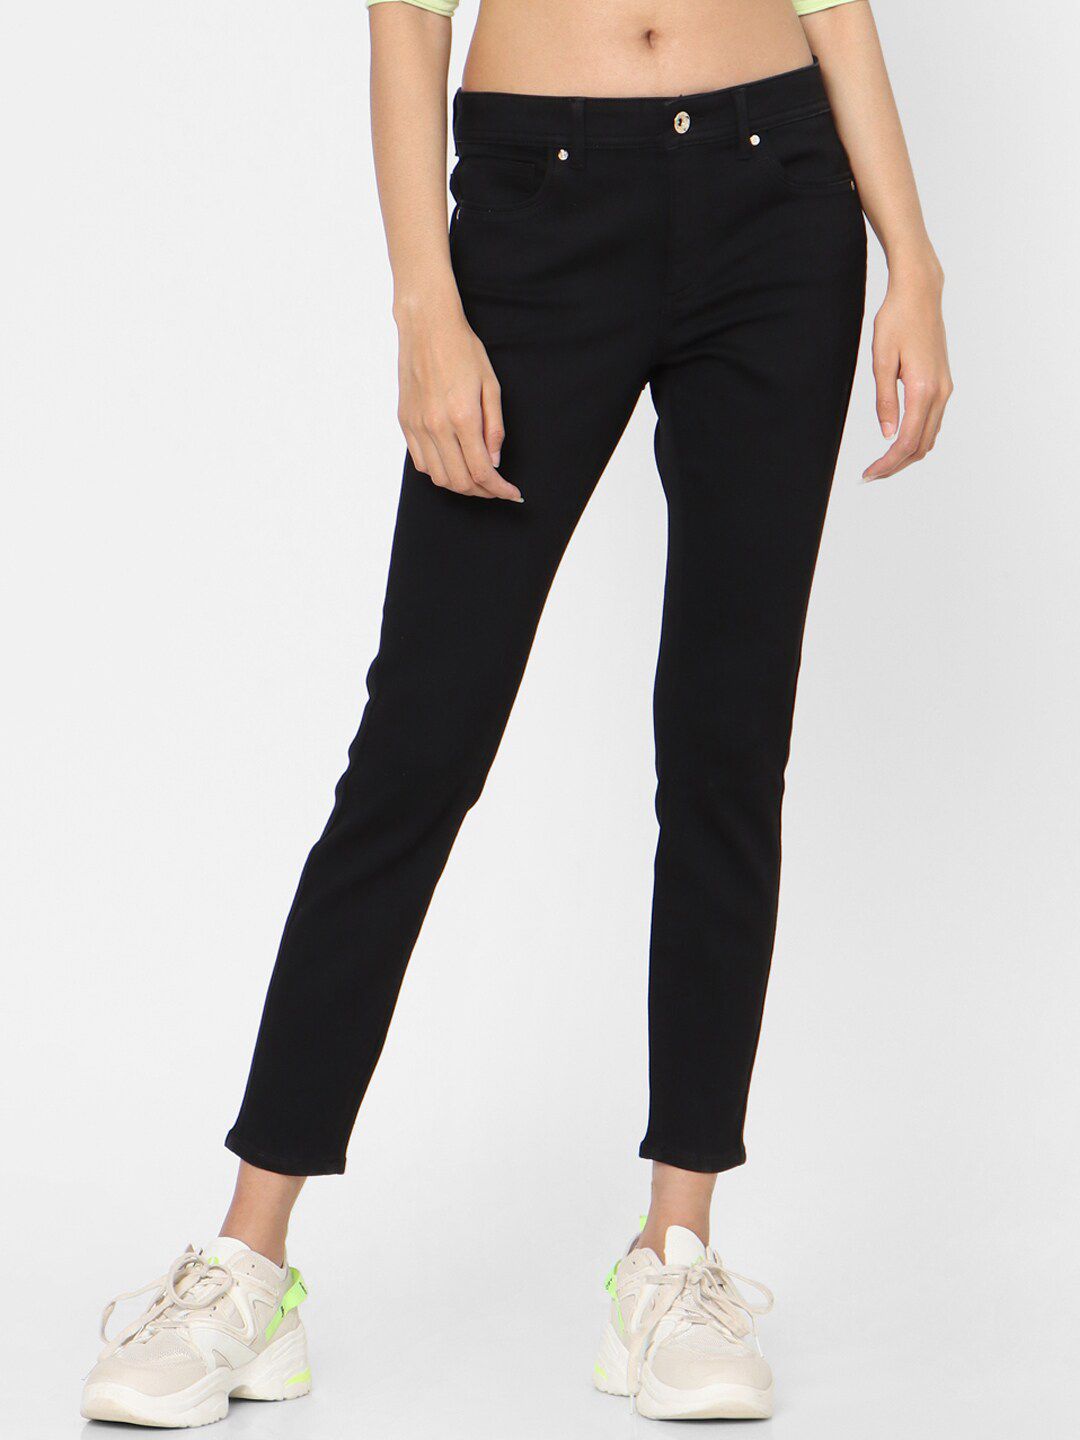 ONLY Women Black Jeans Price in India